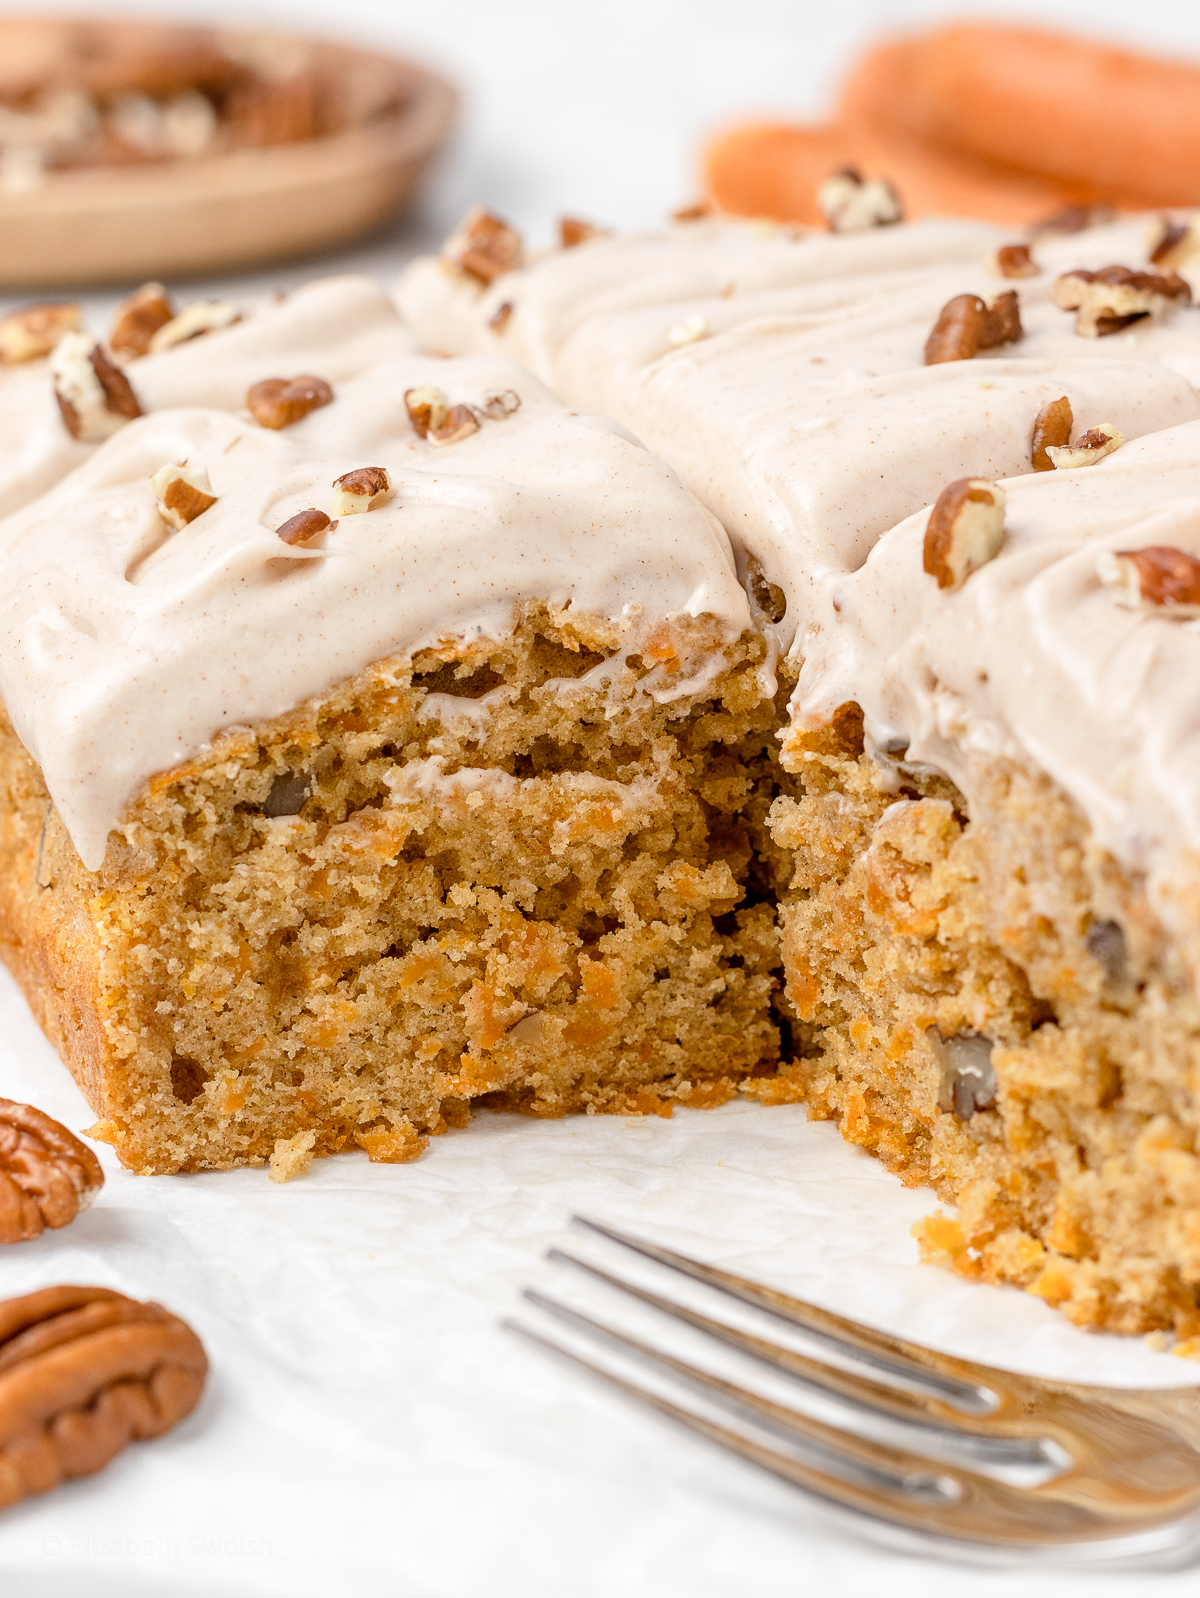 A close up of the cake's soft and tender interior. It is filled with shredded carrots and toasted pecans.